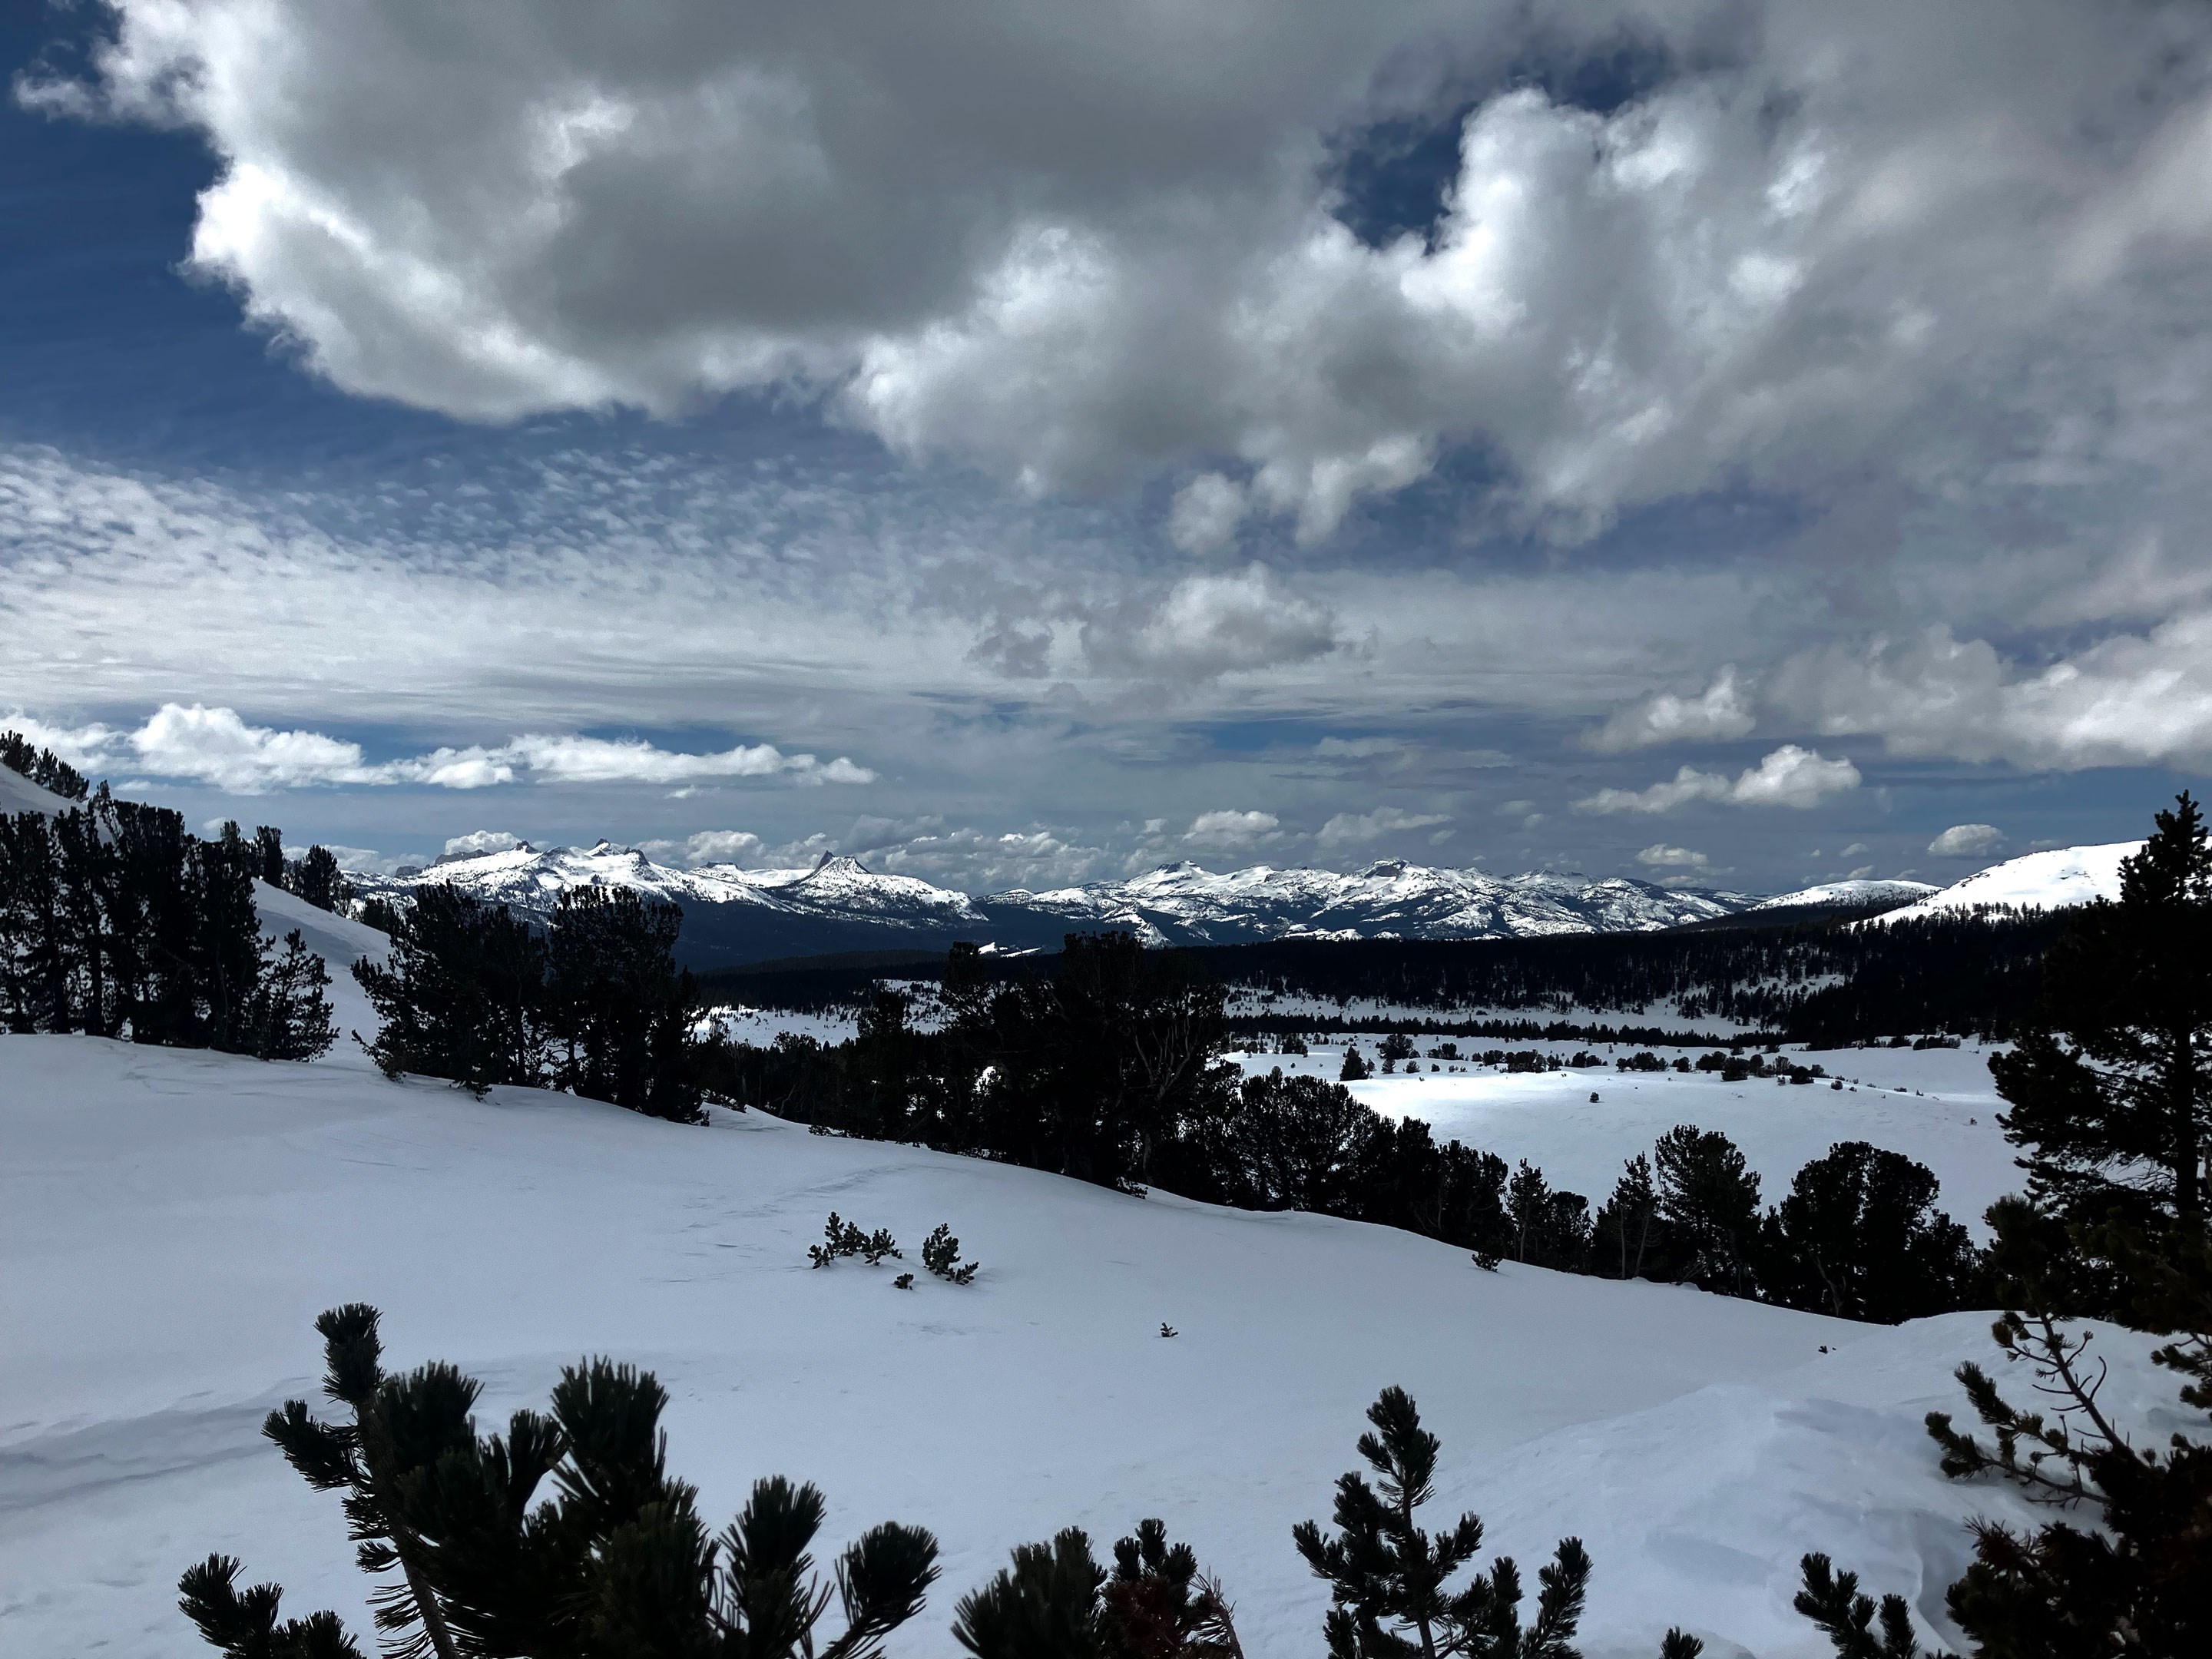 Sanding on a snowy hill will rolling snowy hills in foreground and snowy peaks in background; partly cloudy sky with cumulus, altostratus, and altocumulus clouds